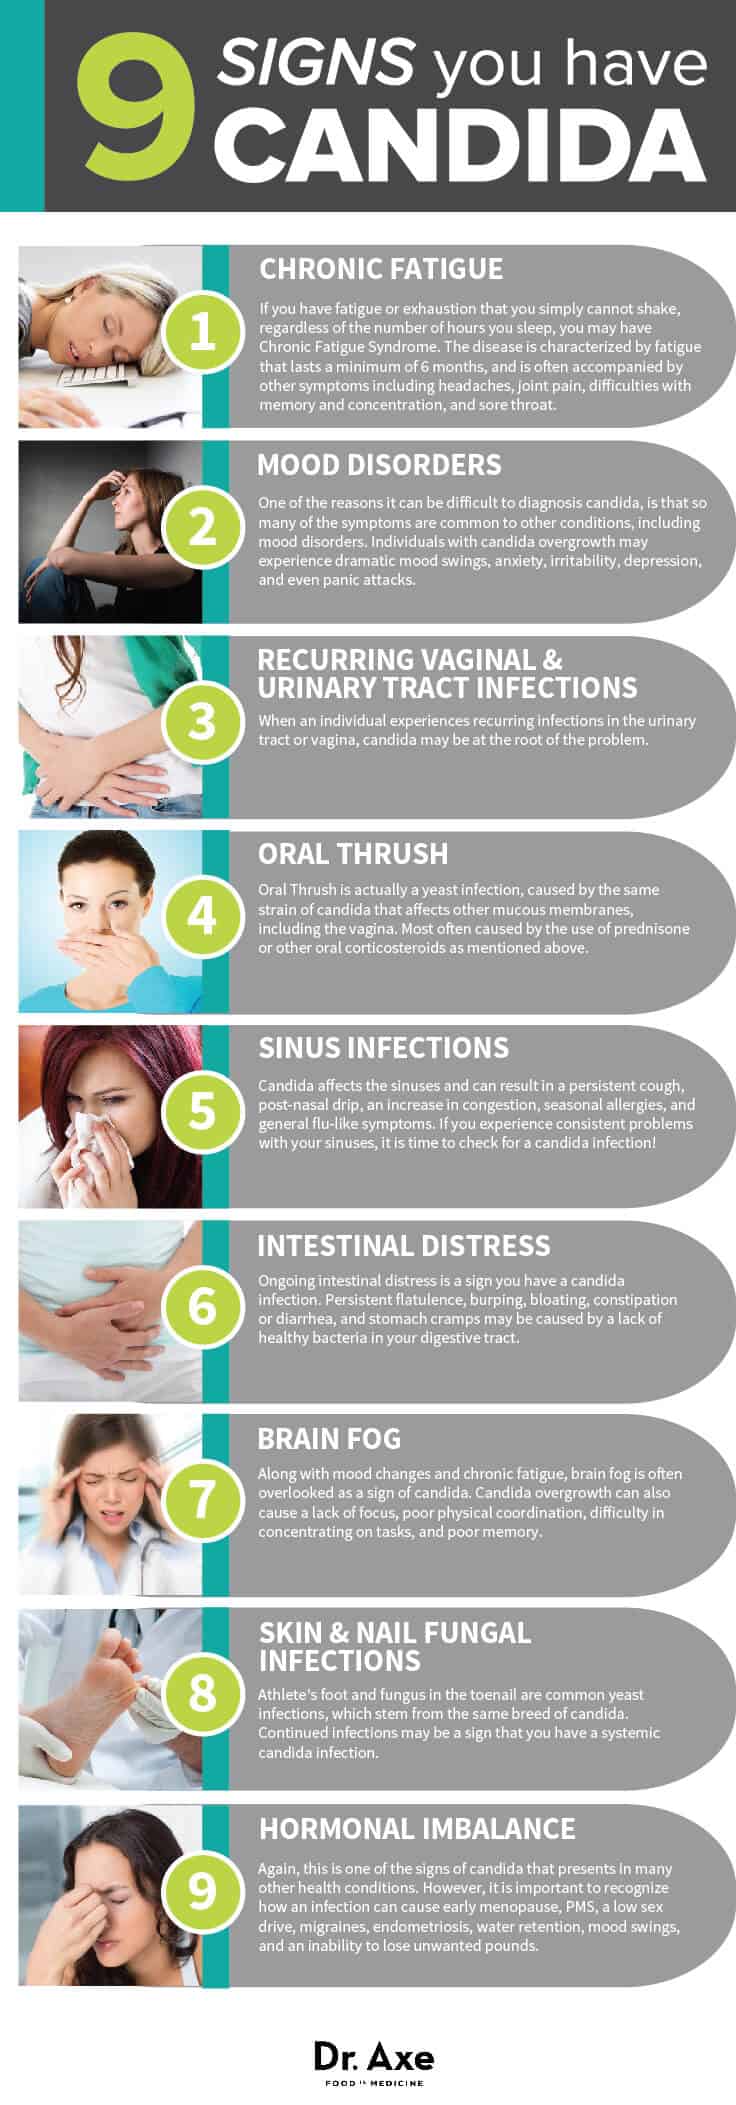 9 Signs You Have Candida